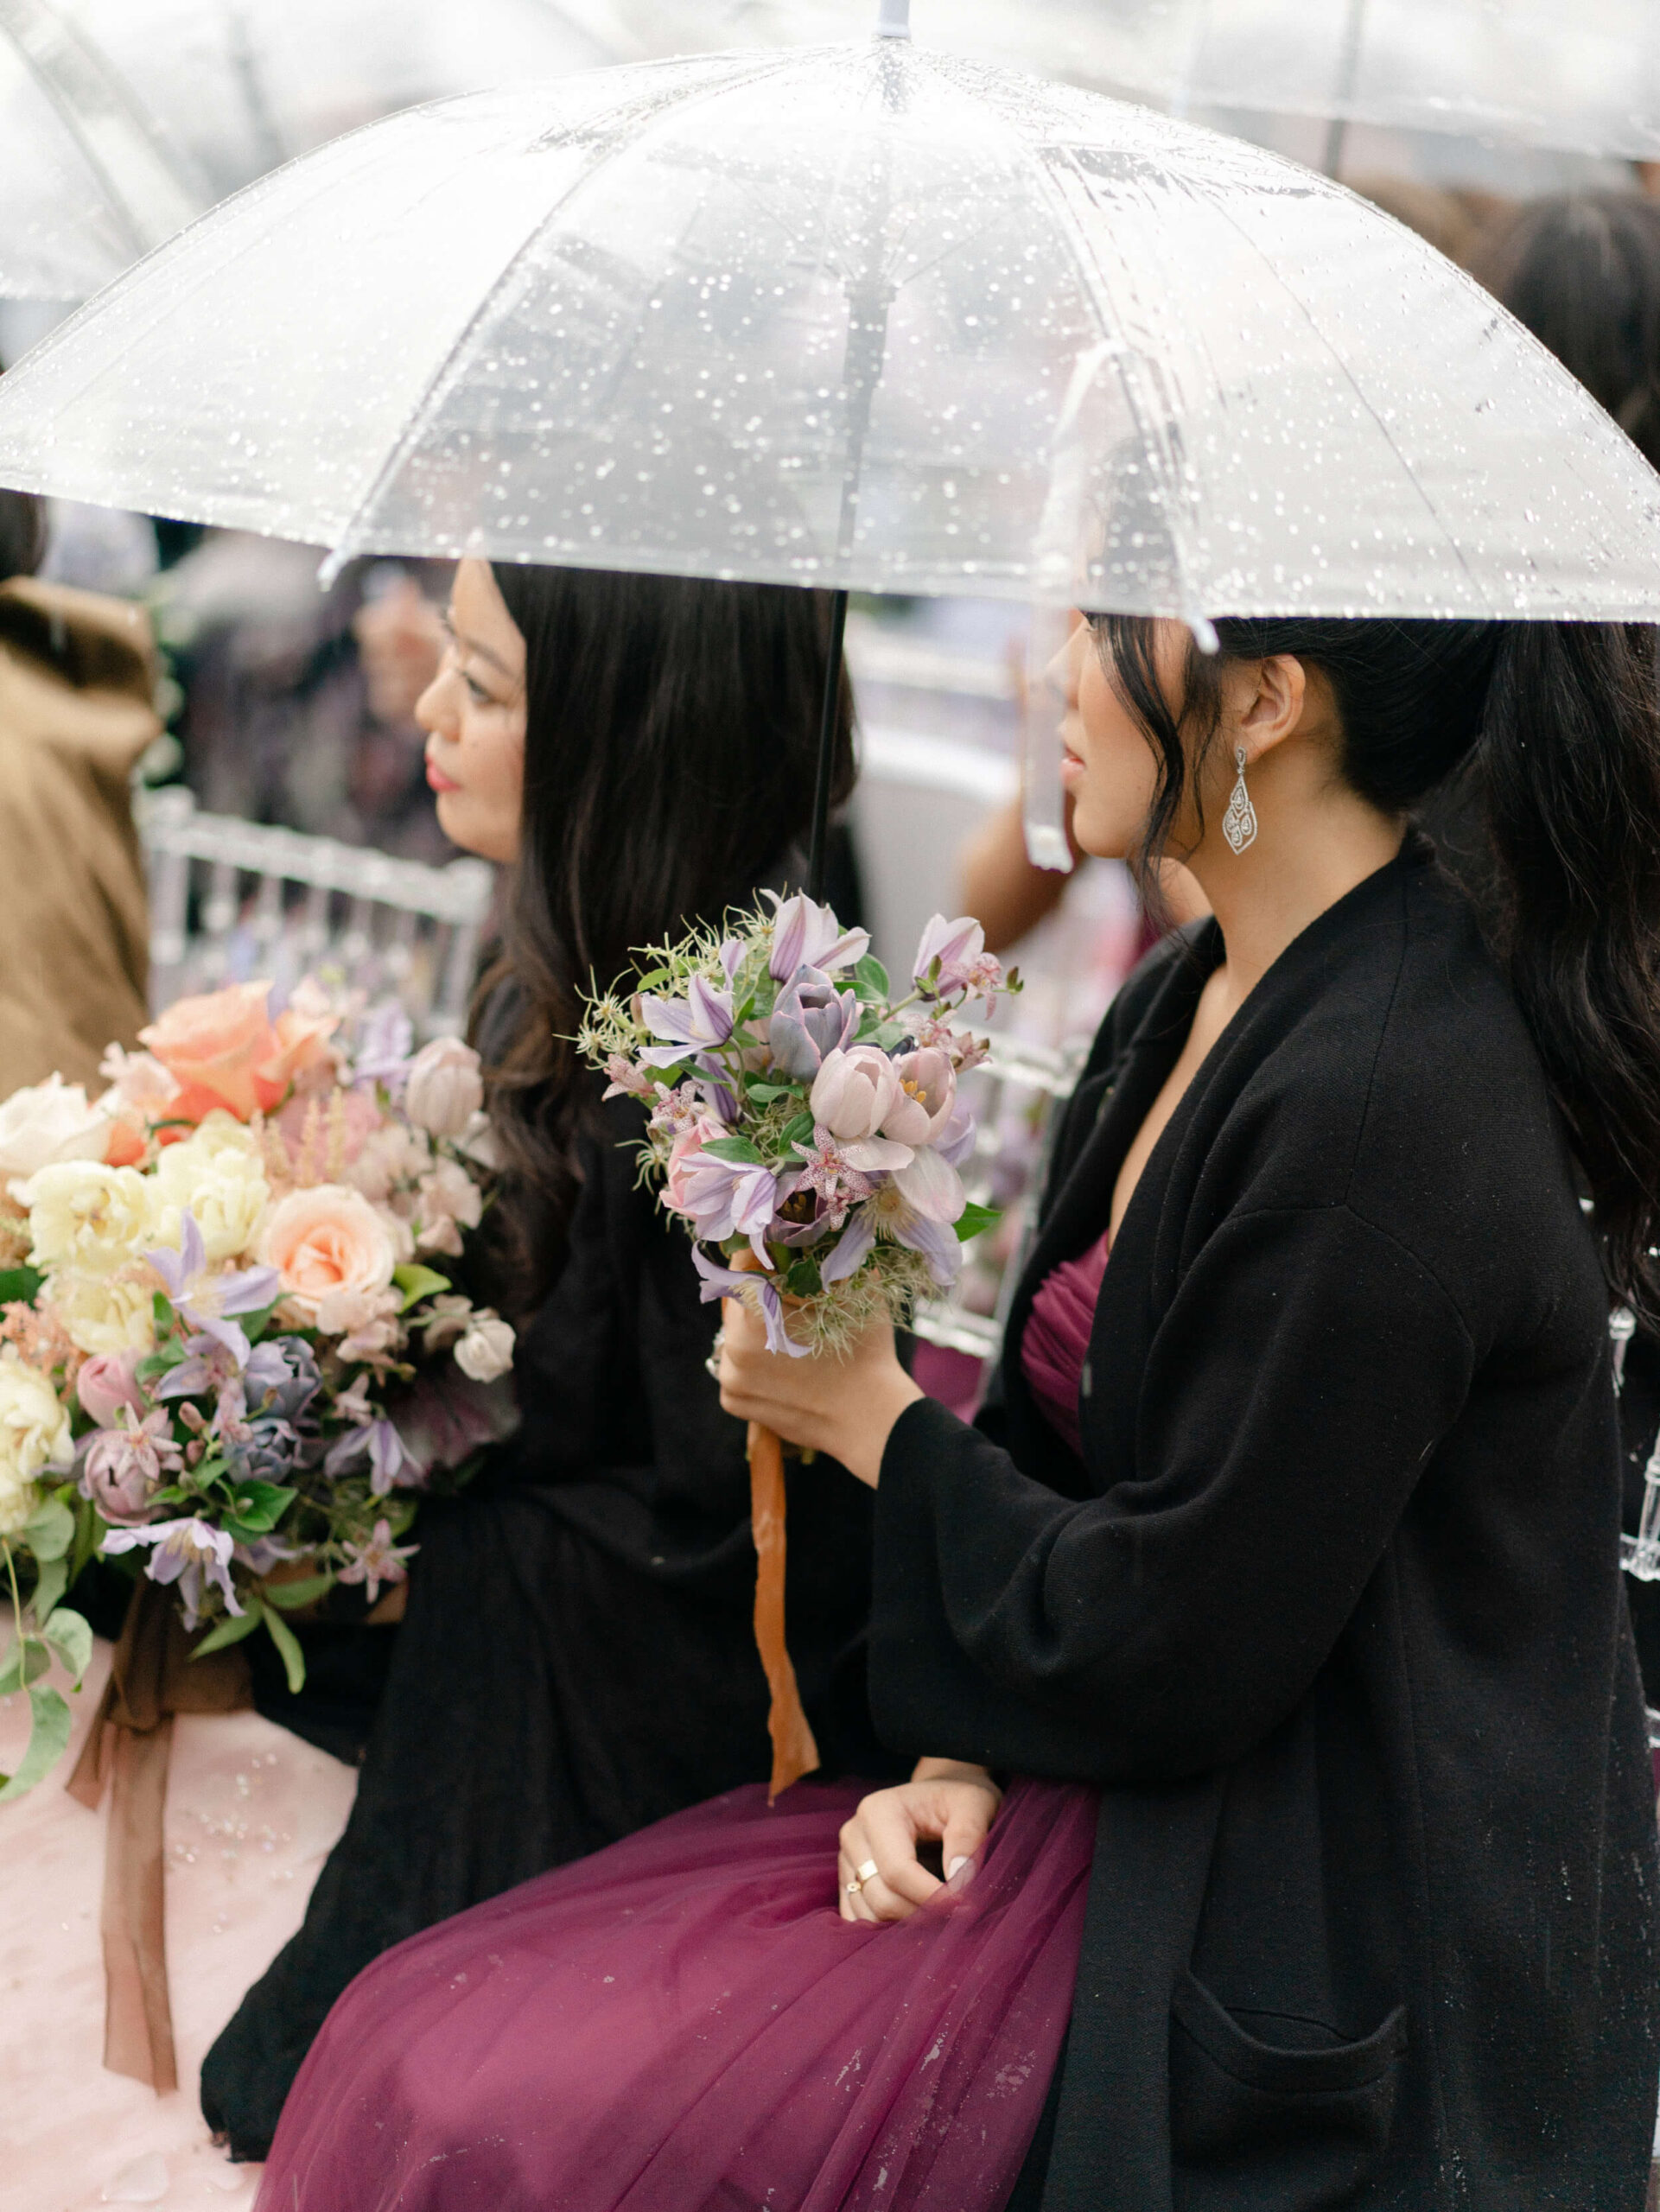 transparent umbrellas cover the bridesmaids from an unexpected shower